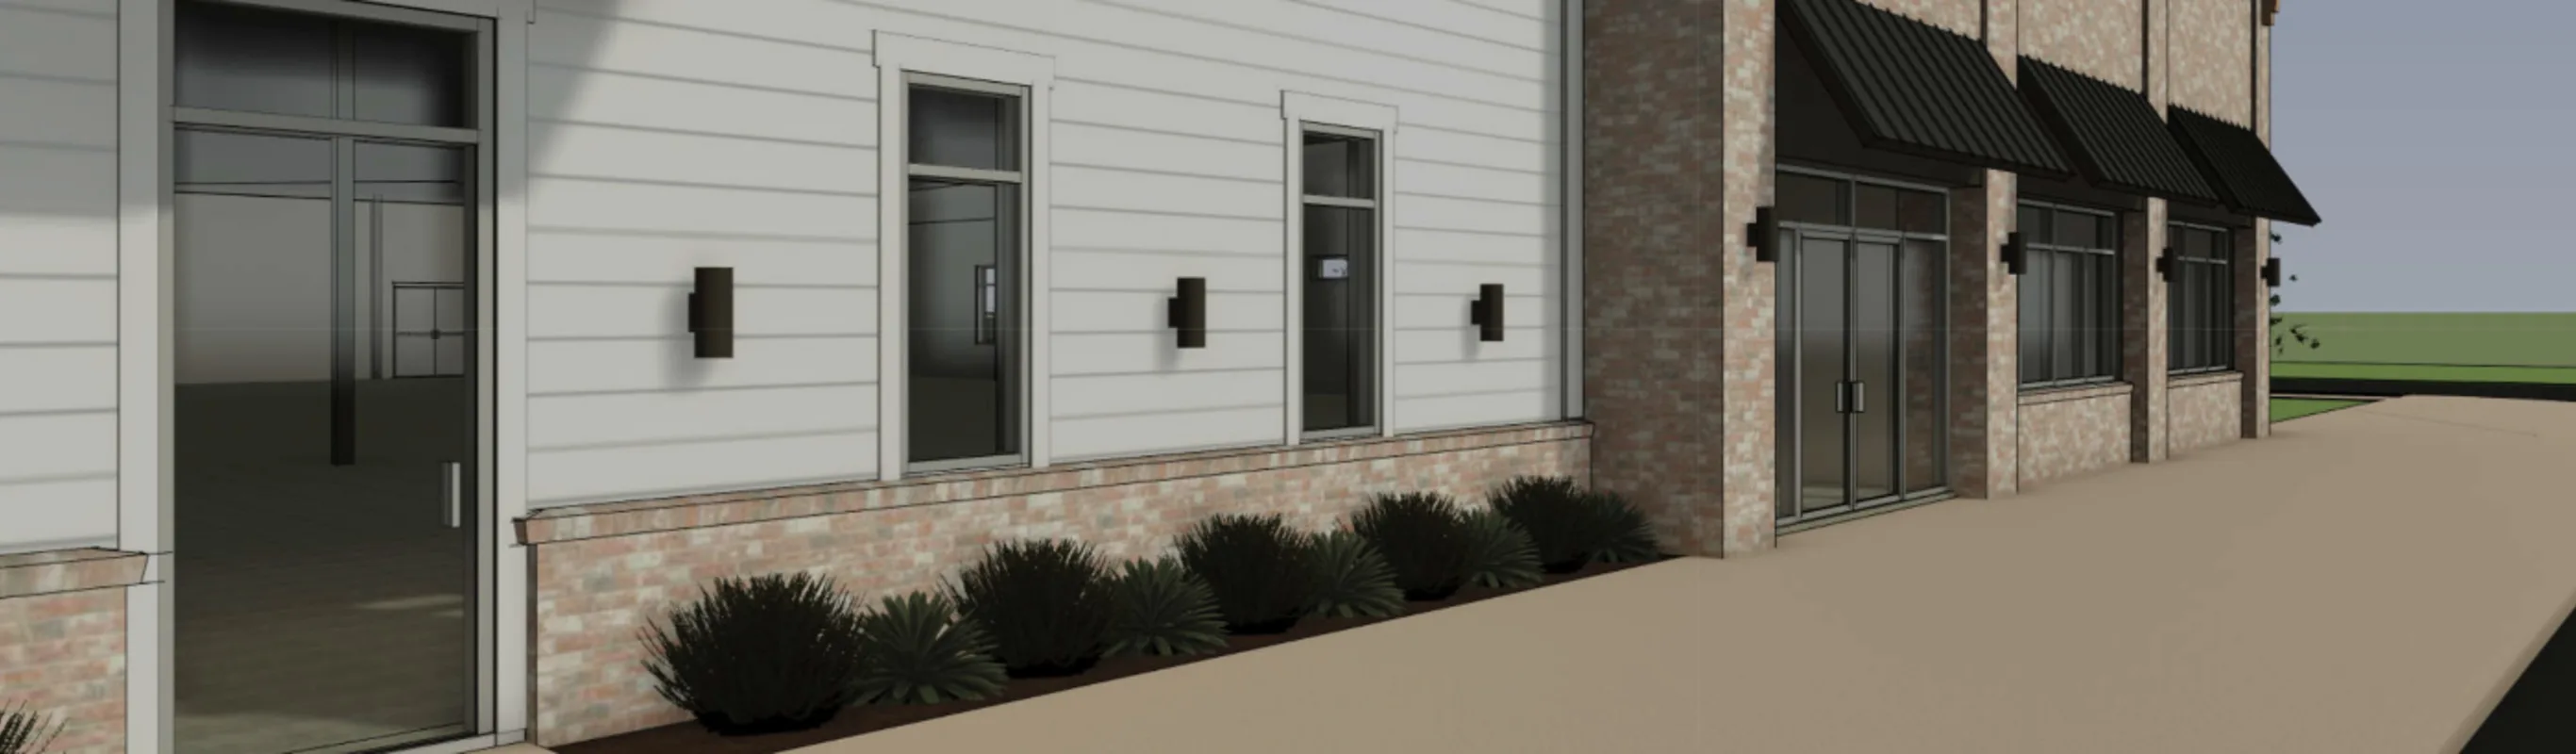 A rendering of the front door at the new location of Animal Emergency & Critical Care